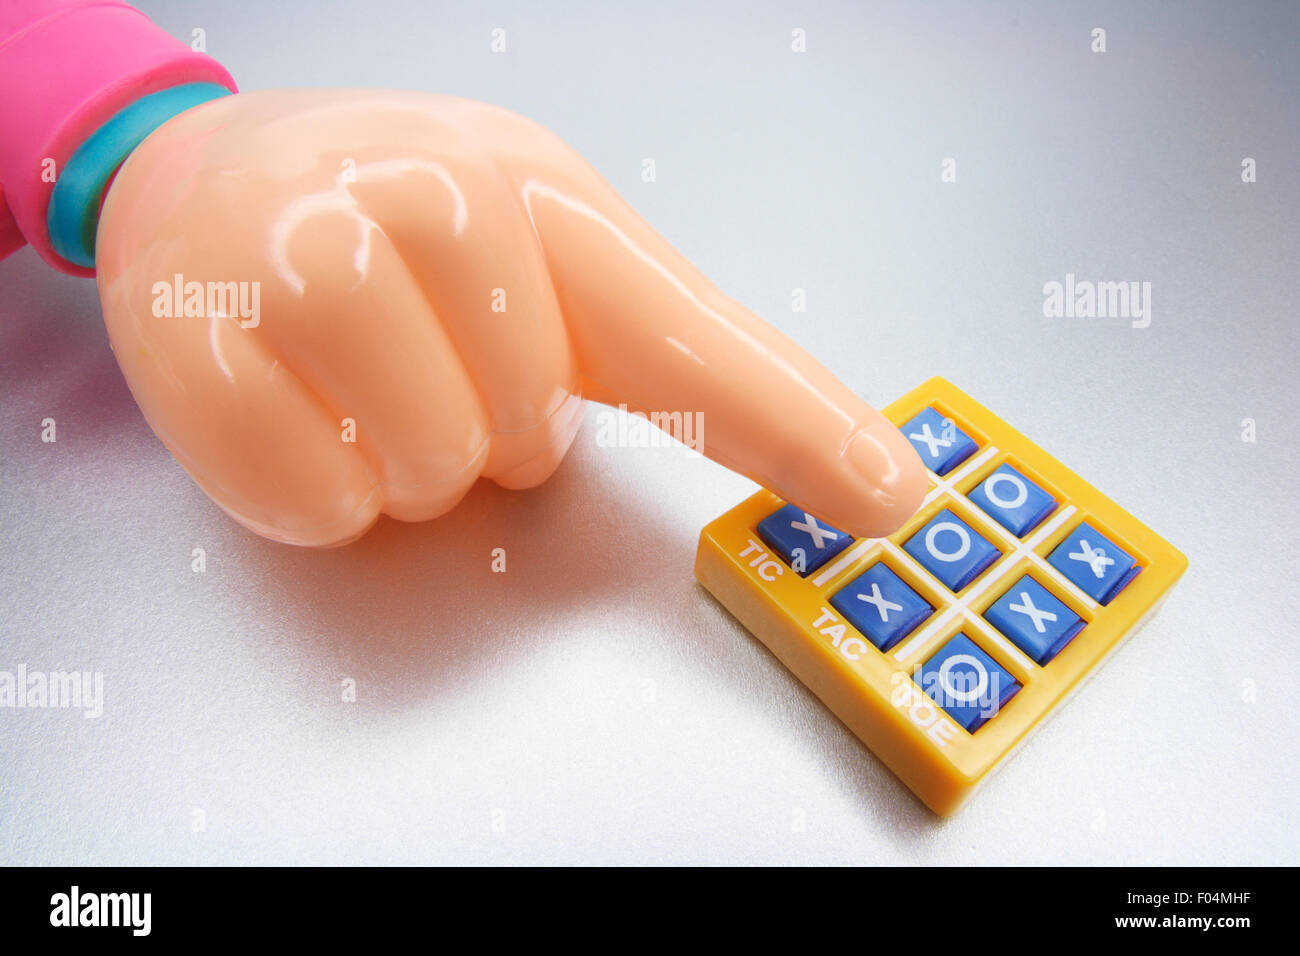 Plastic Hand  and Tic Tac Toe Game Stock Photo